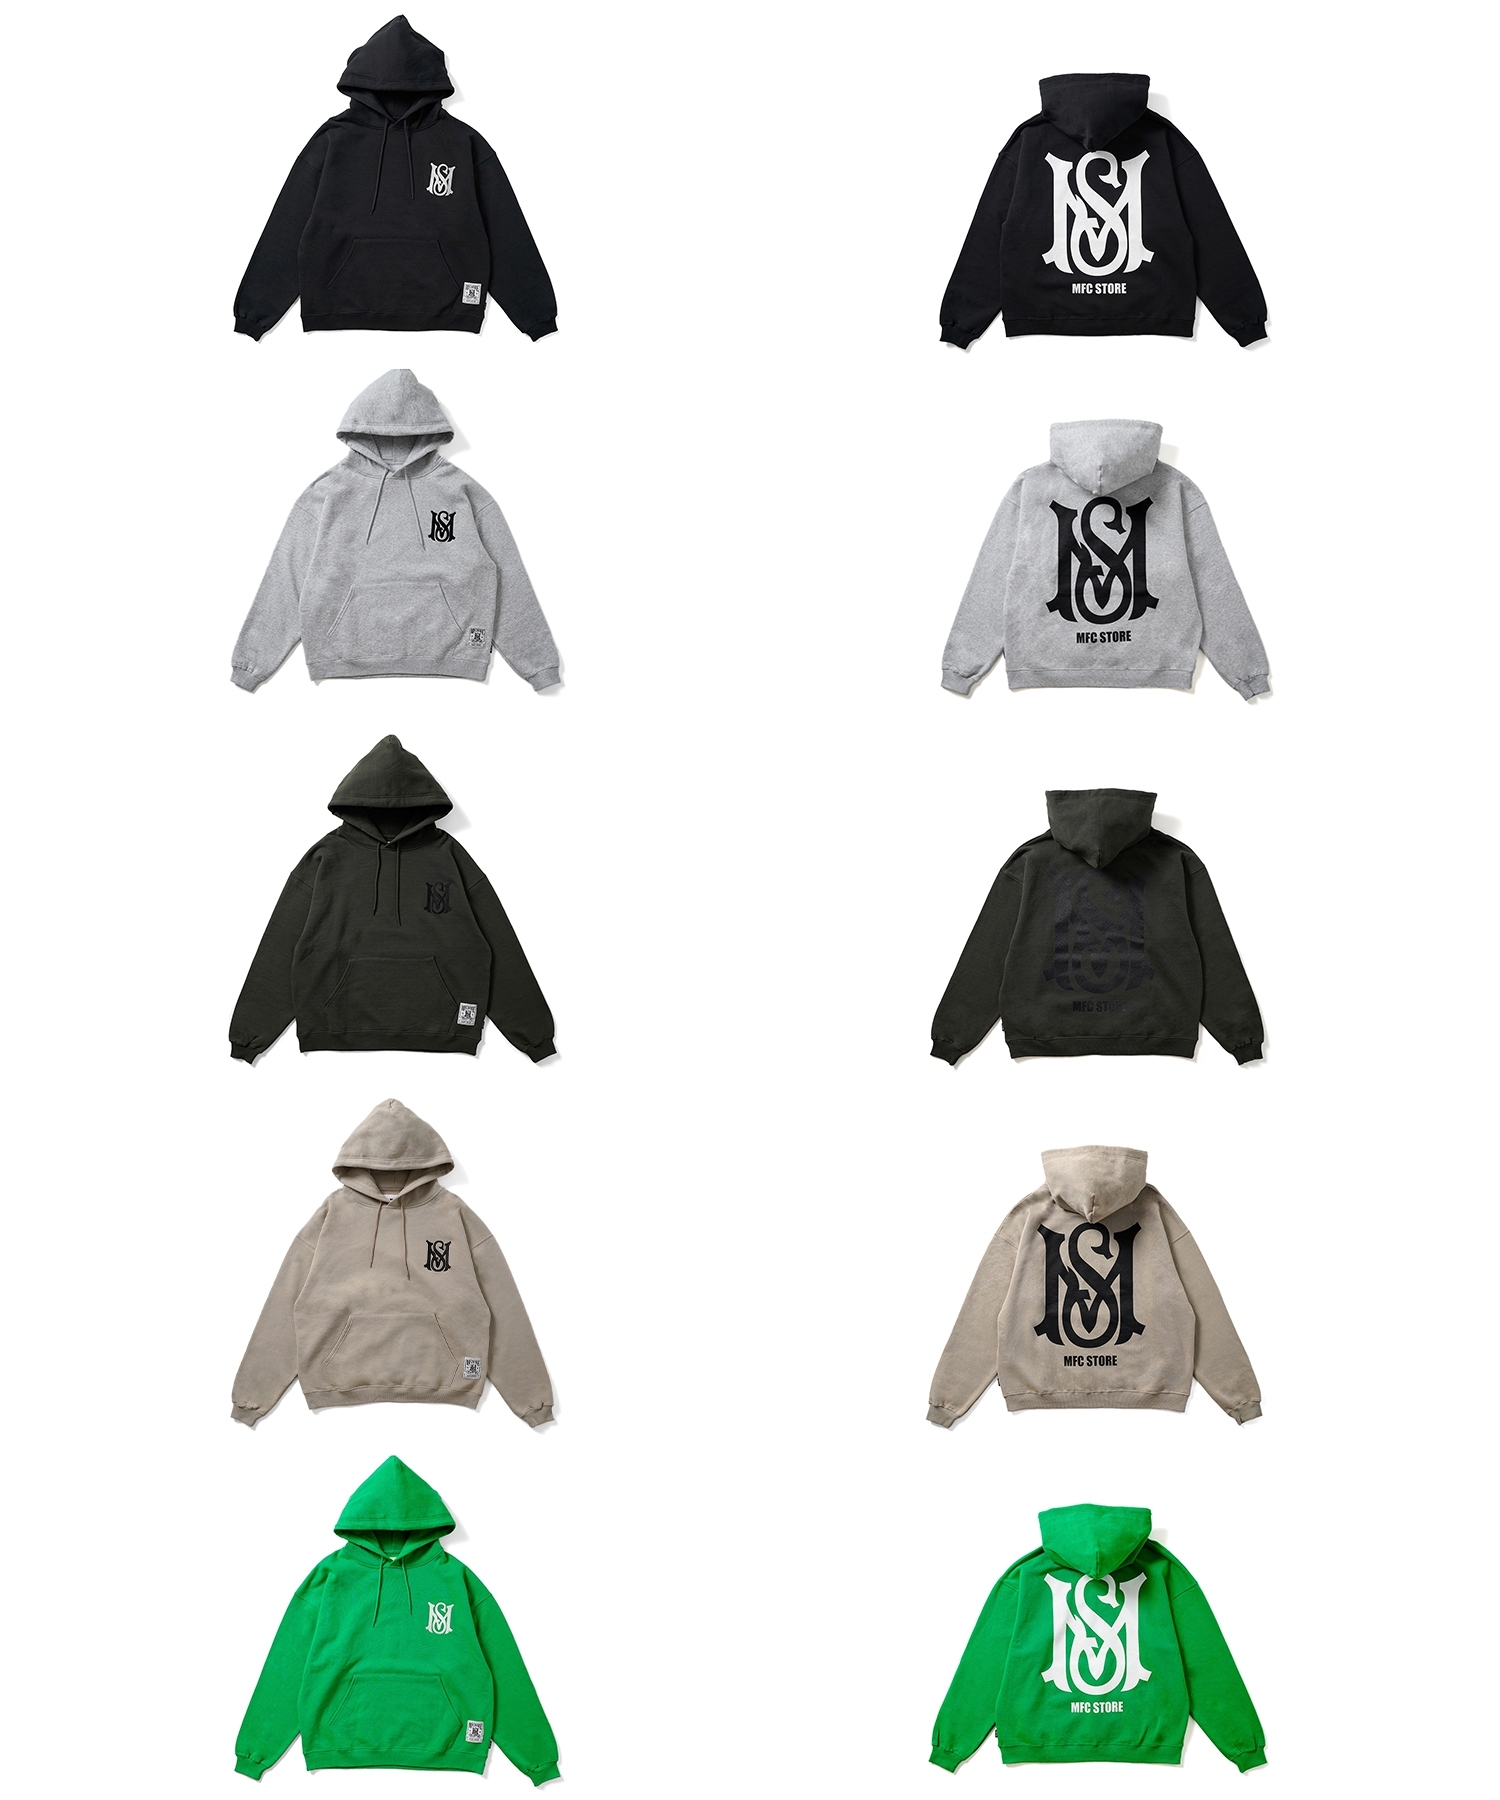 MFC STORE MS BACK LOGO HOODIE